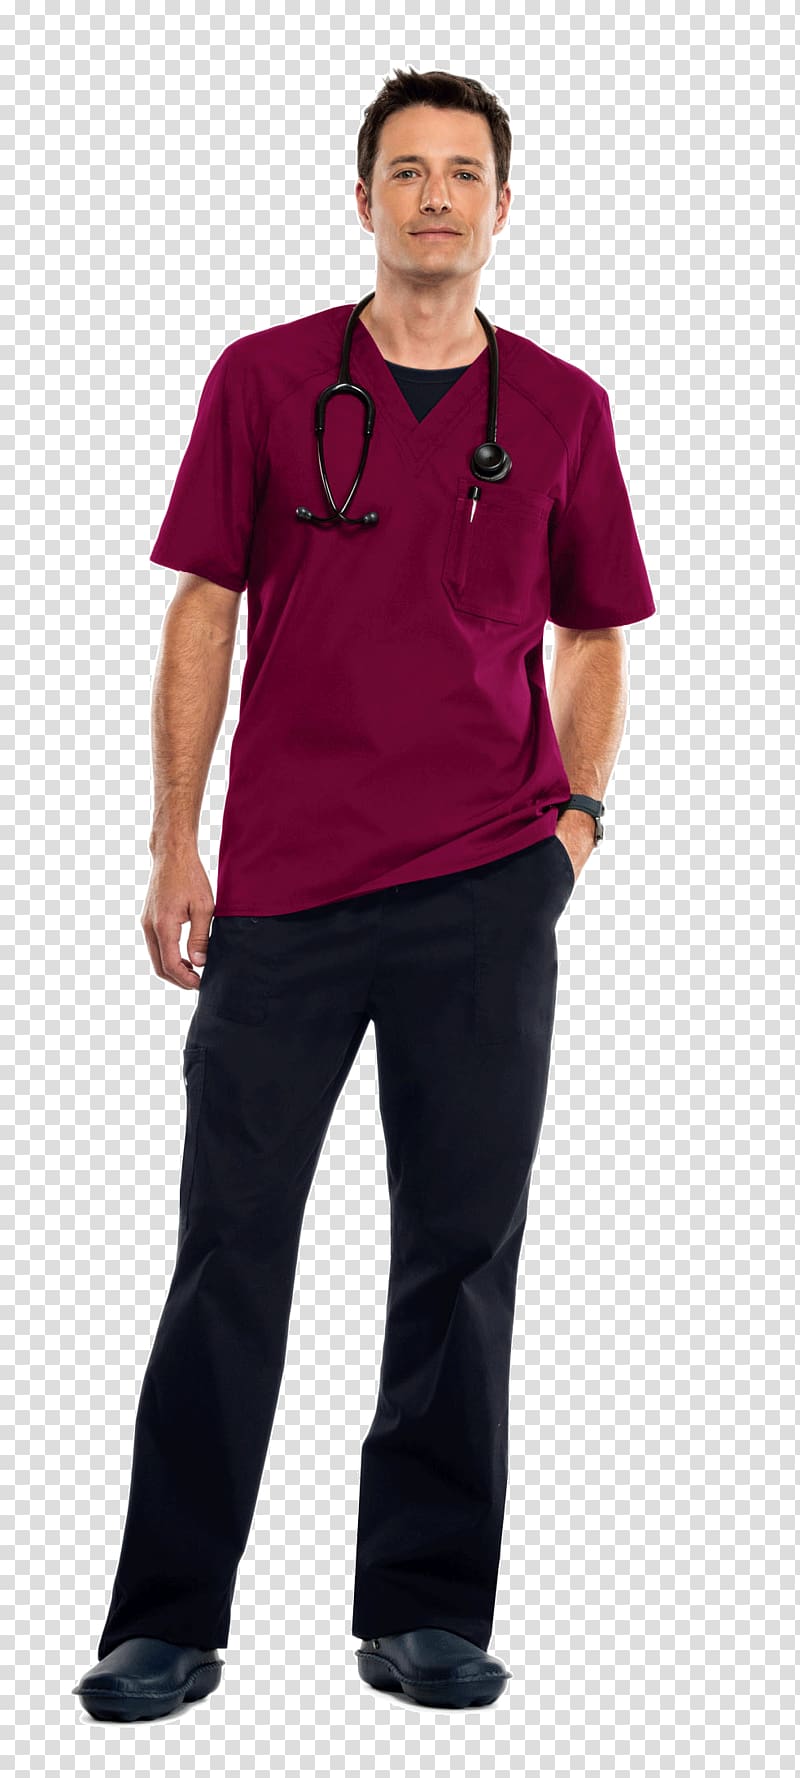 Scrubs T-shirt Hoodie Clothing Top, male nurse transparent background PNG clipart